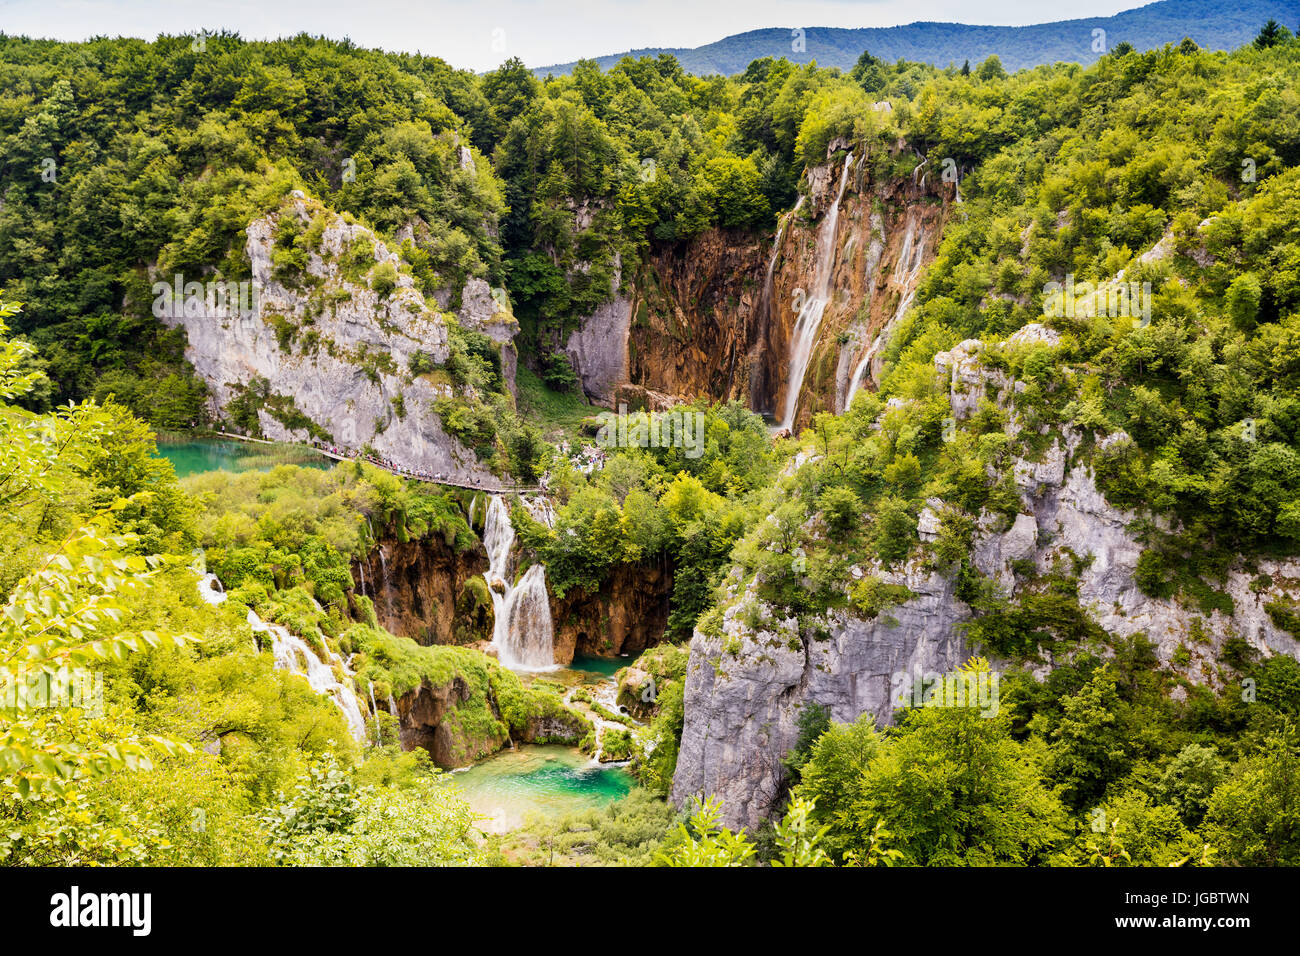 Natural wonder of the world - Plitvice lakes national park in Croatia Stock Photo